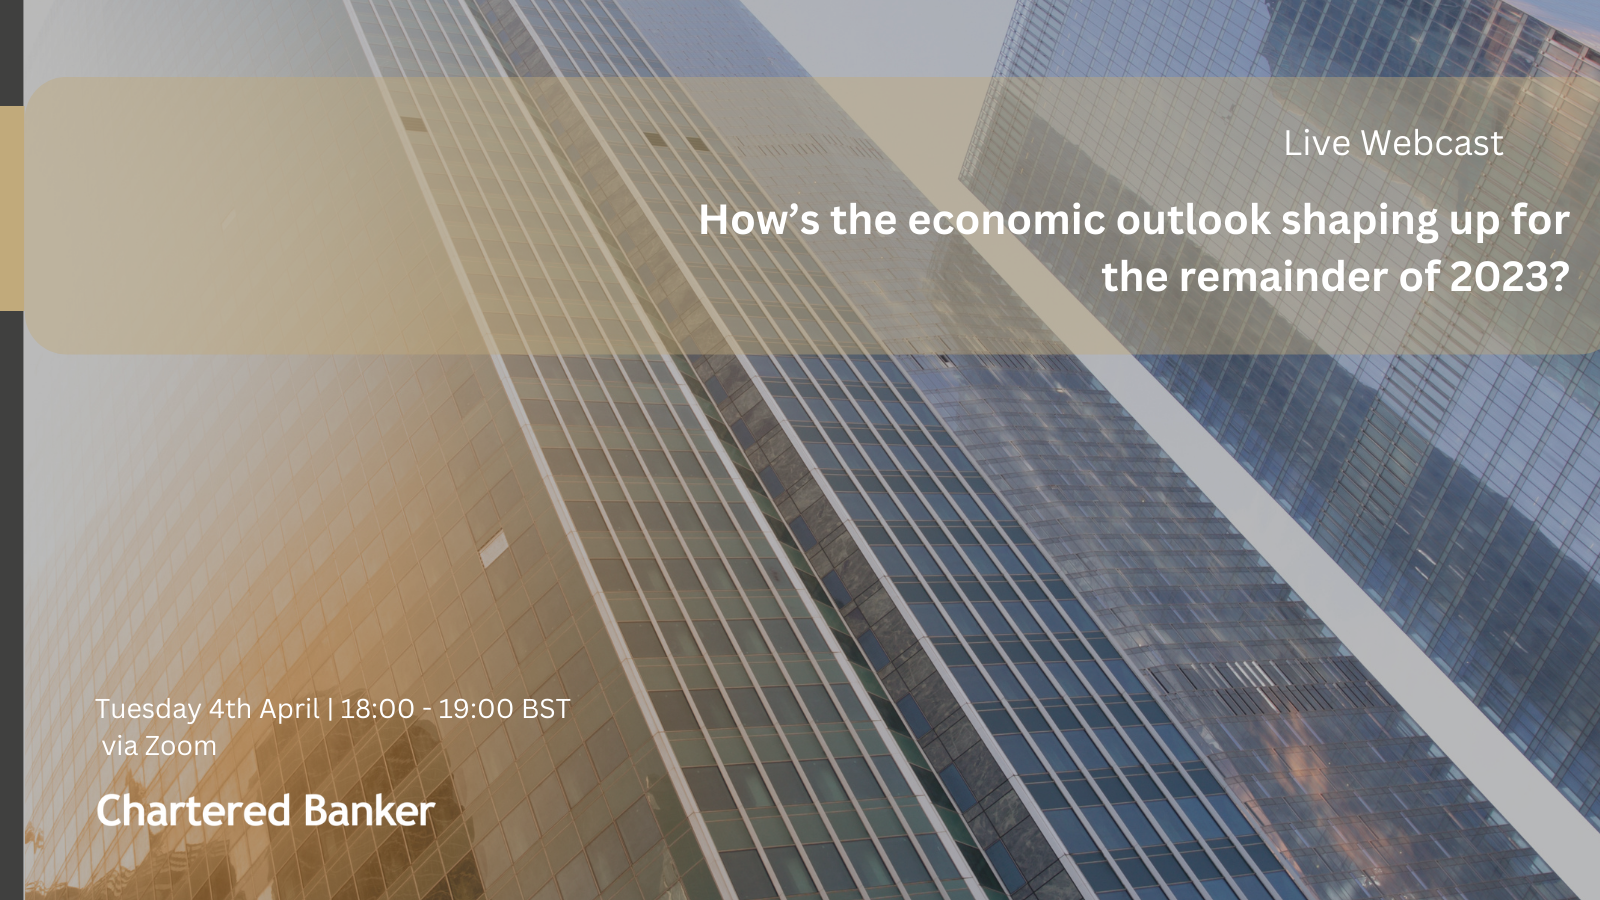 How’s the economic outlook shaping up for the remainder of 2023?